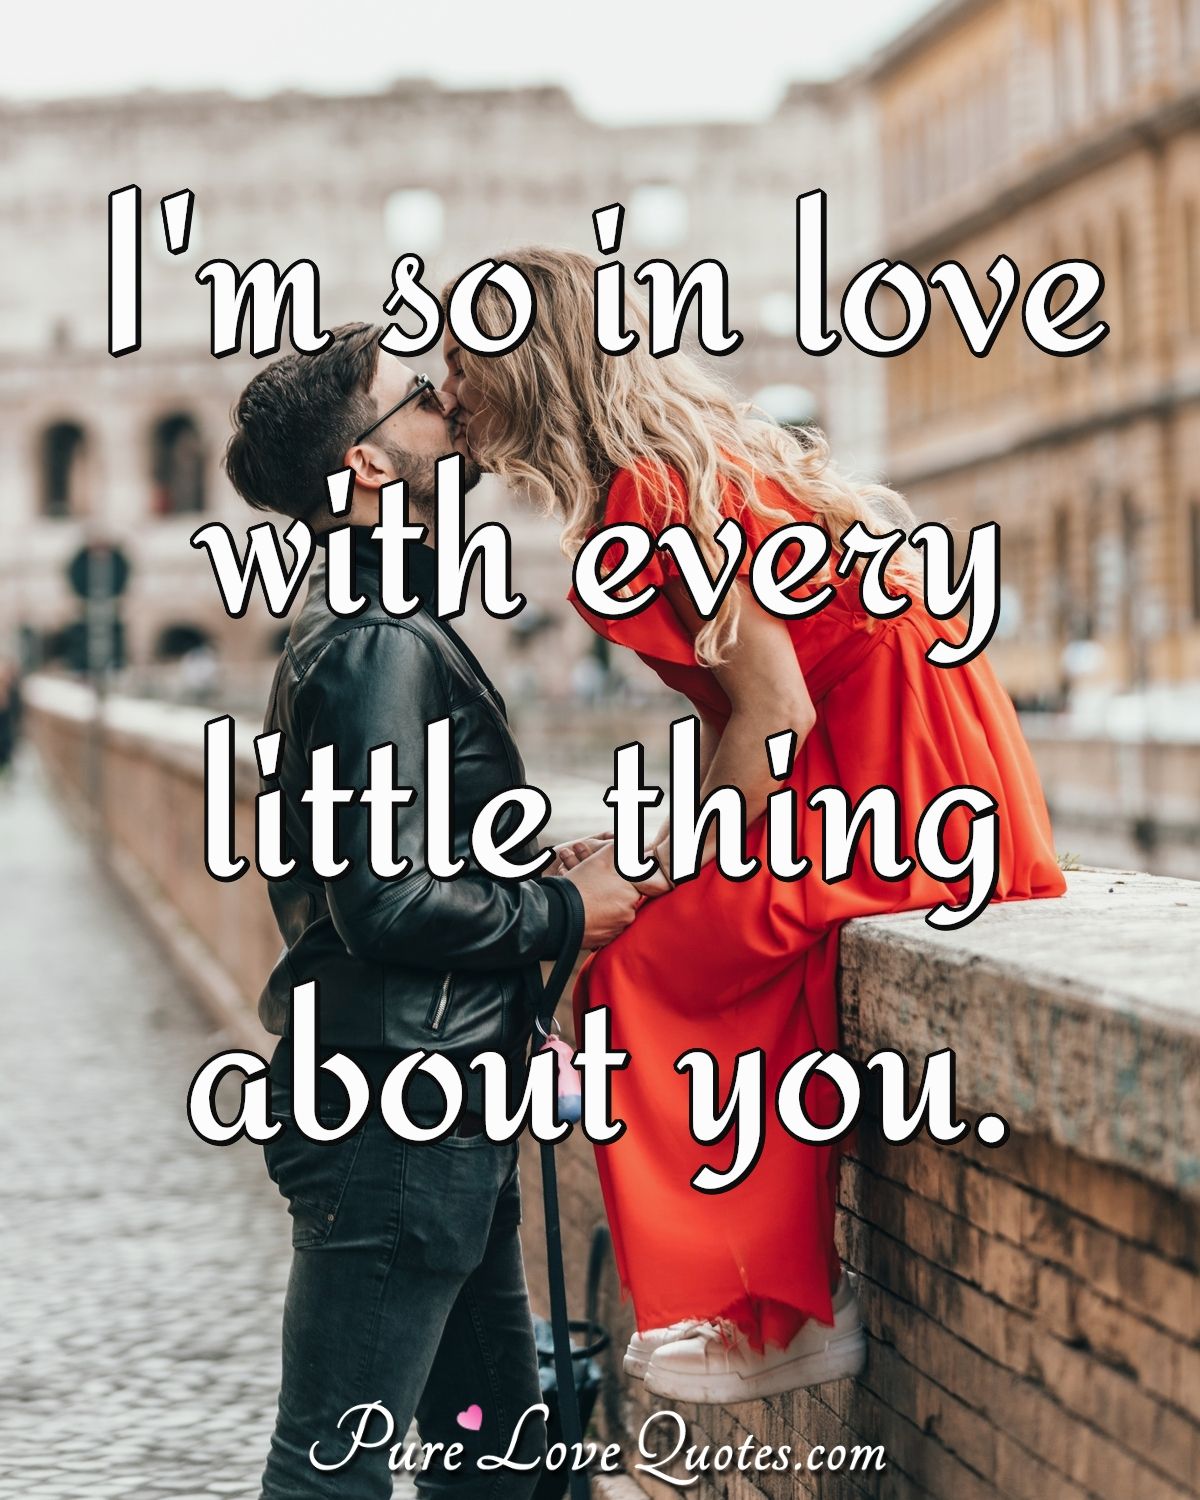 I'm so in love with every little thing about you. - Anonymous